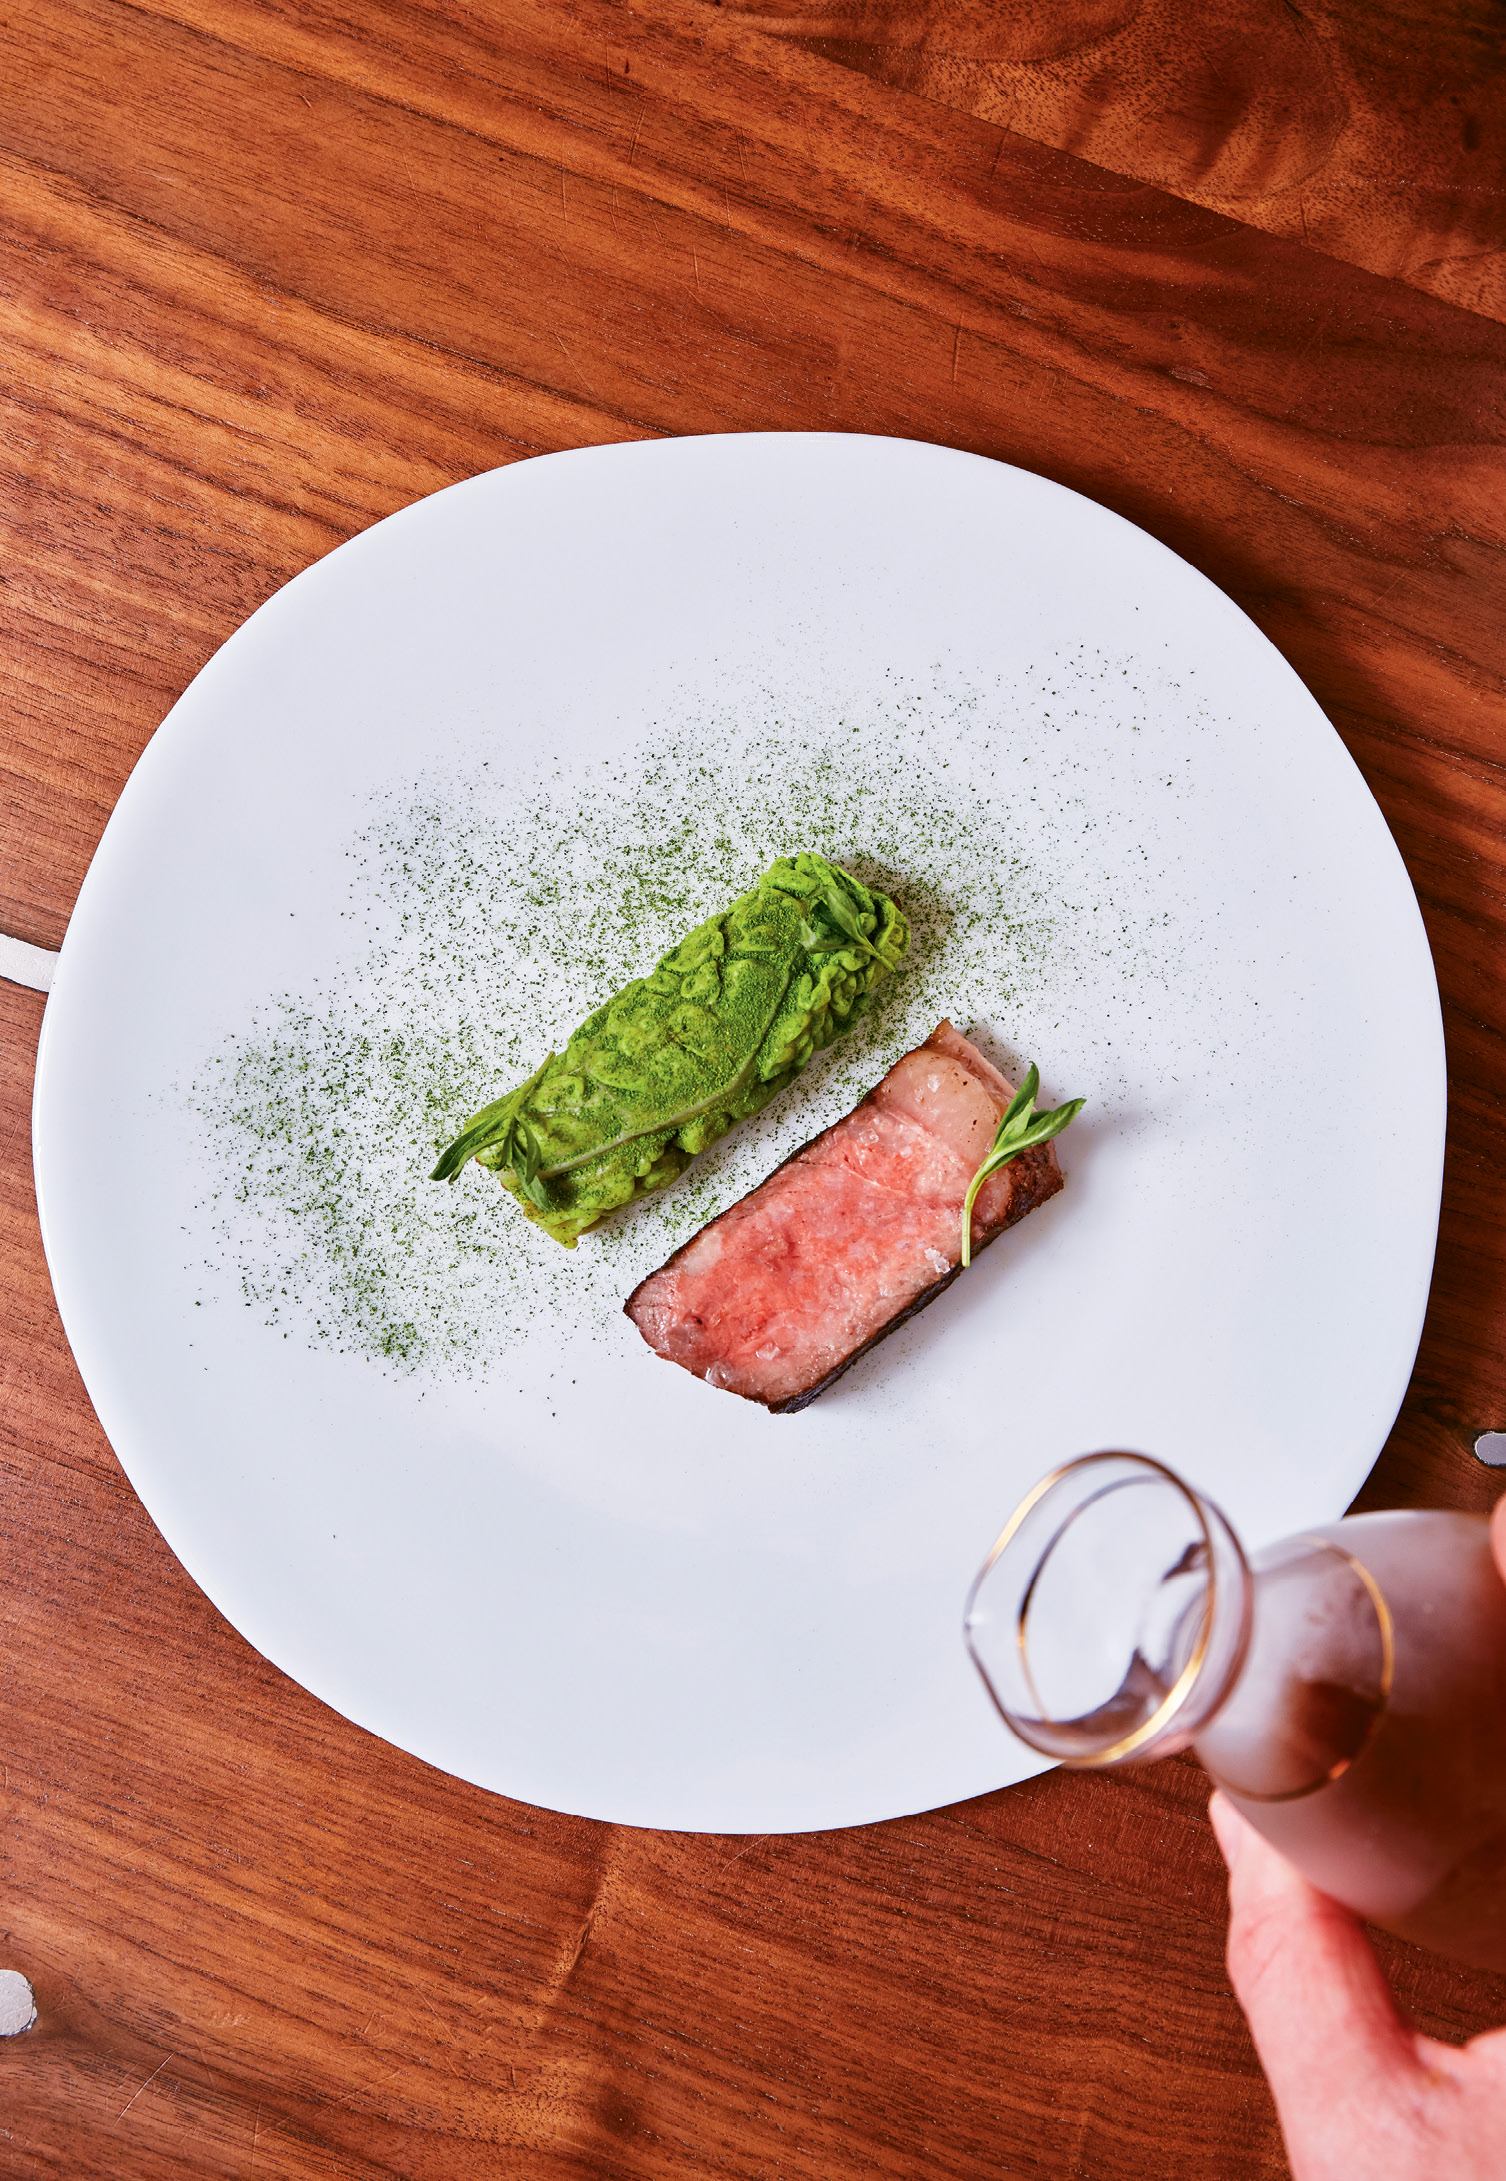 Worth the wait: Dry-aged beef is prepared on a Japanese Konro grill, which produces no sizzle or smoke while it gently sears and cooks the meat. A savoy cabbage leaf, stuffed with farro and kimchi, is served on the side.